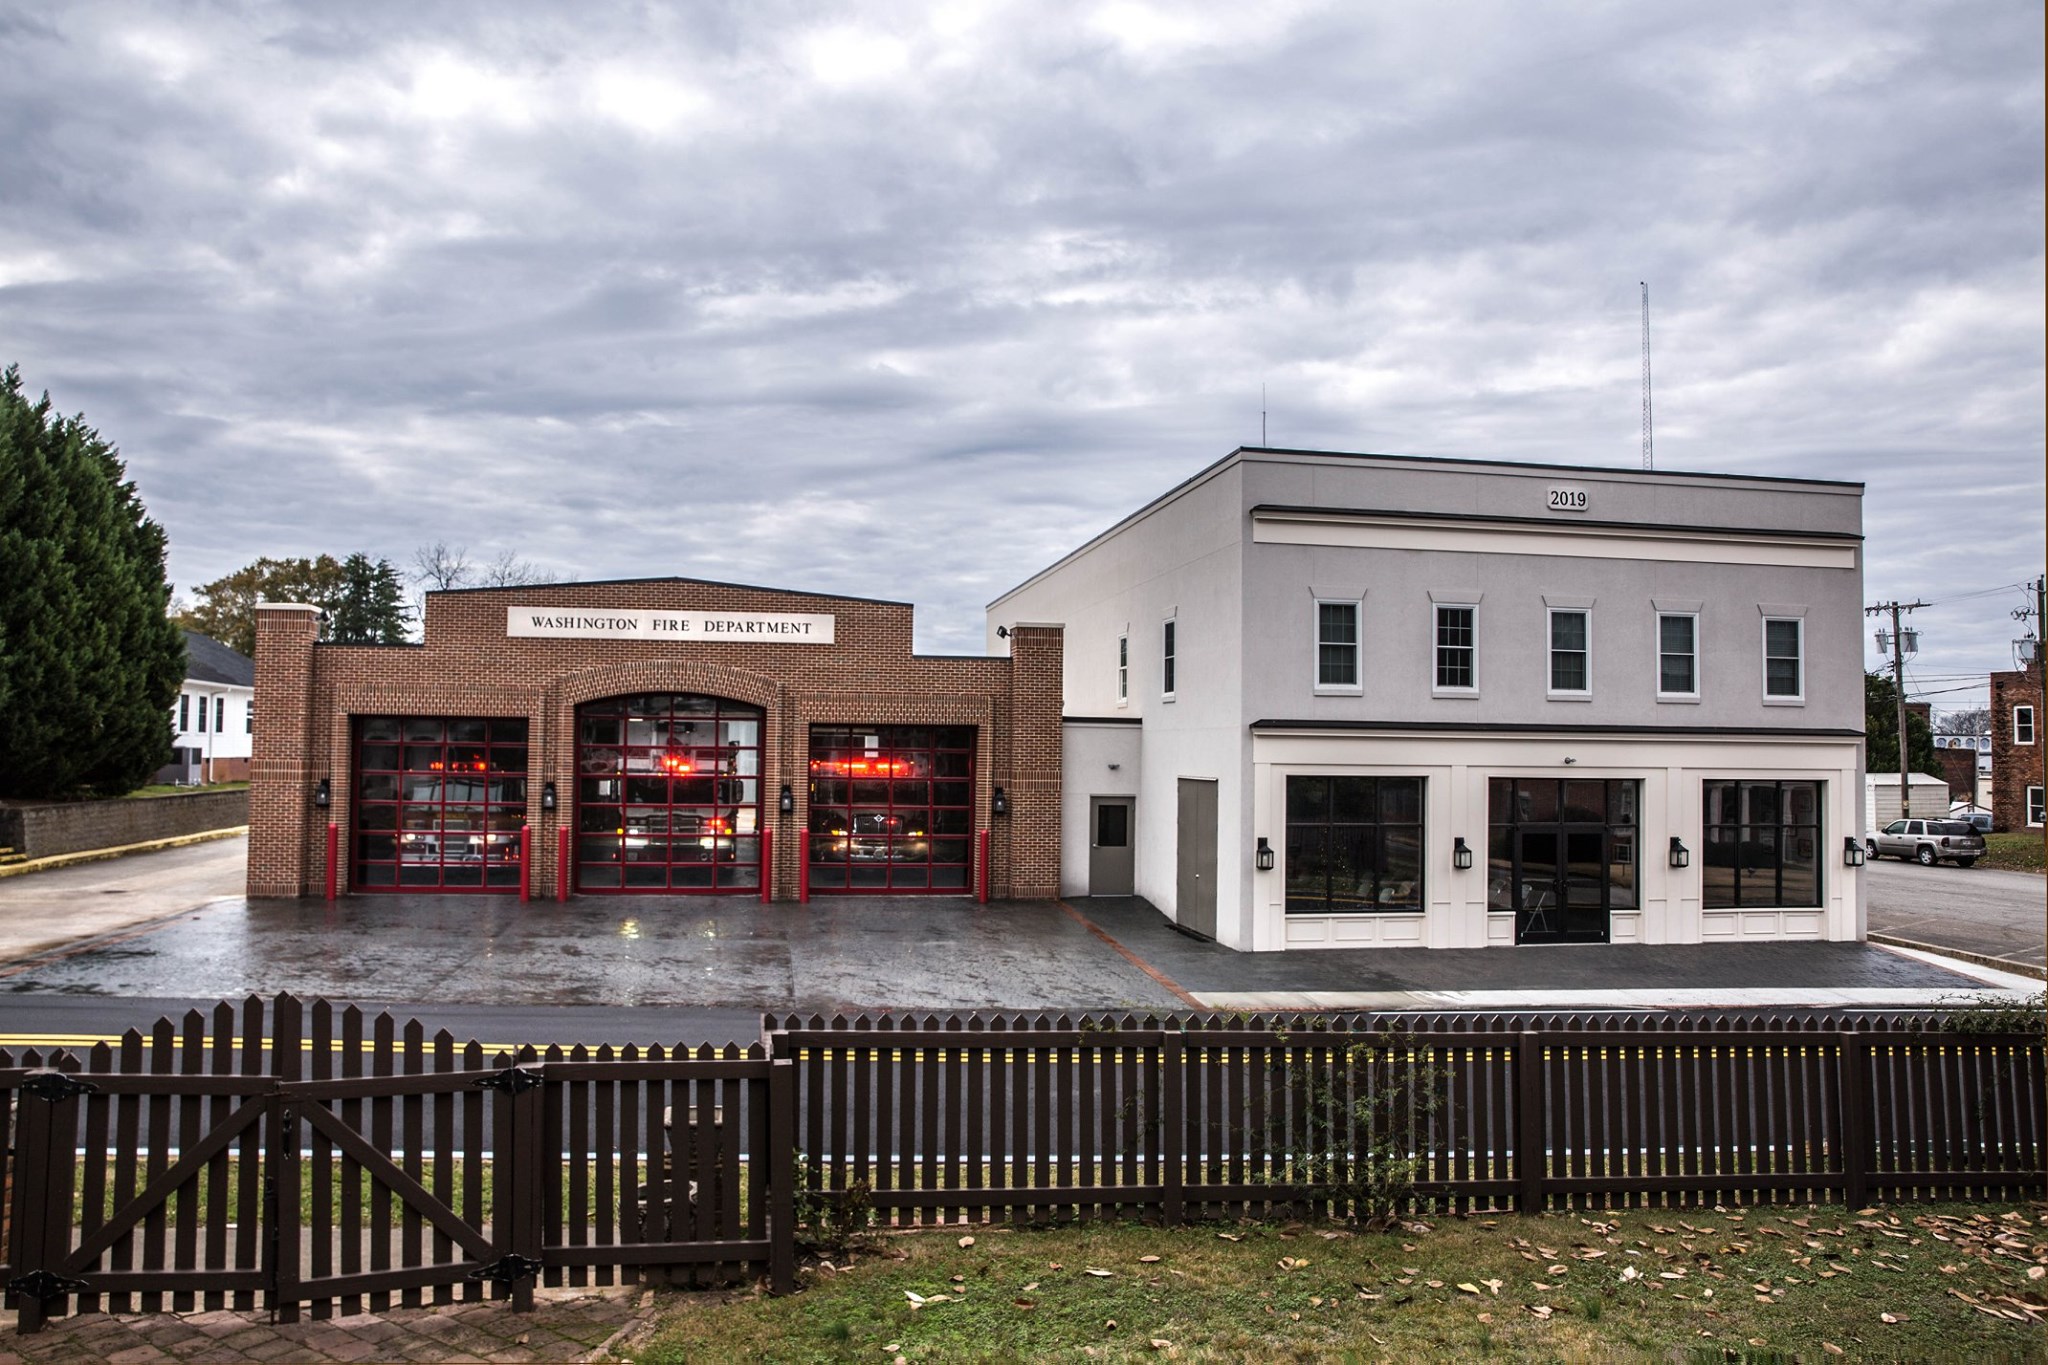 The City of Washington's fire department. 